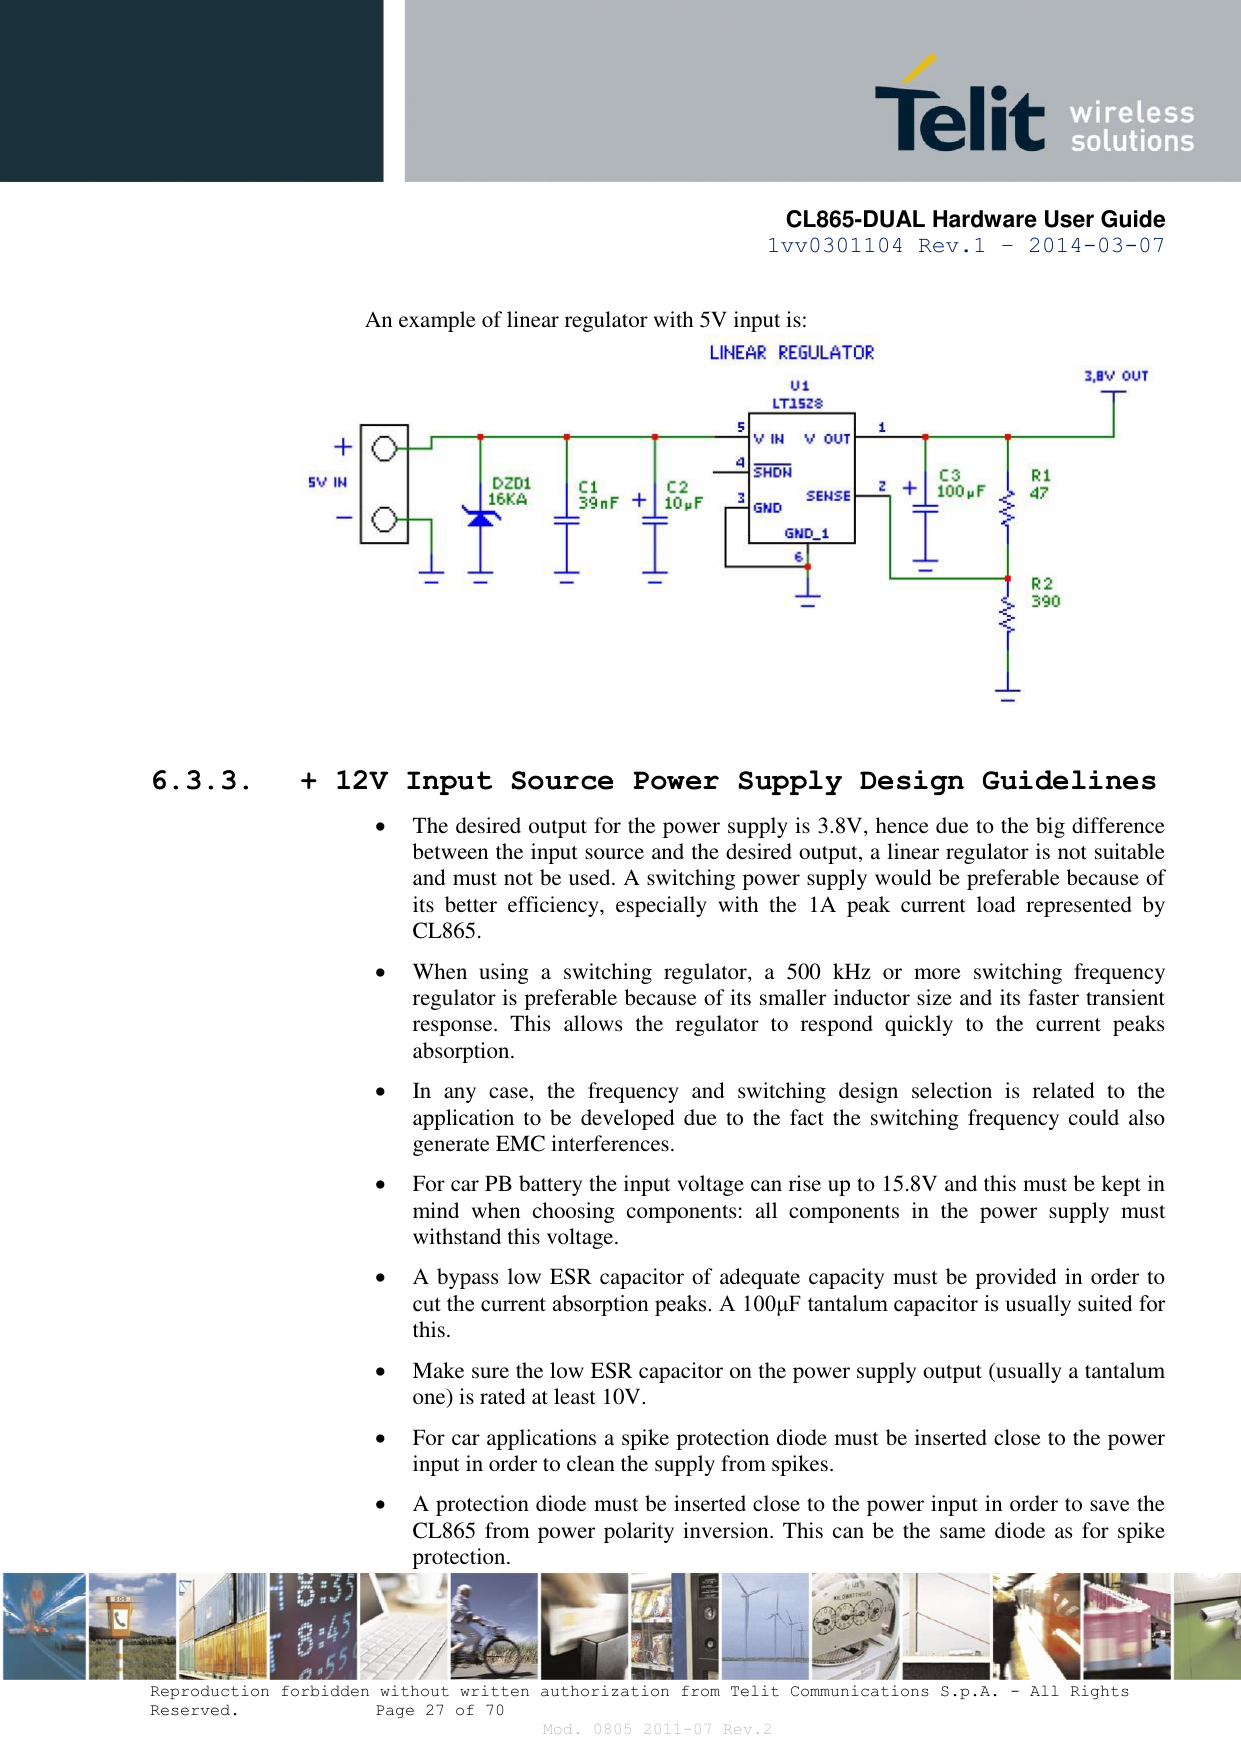       CL865-DUAL Hardware User Guide 1vv0301104 Rev.1 – 2014-03-07  Reproduction forbidden without written authorization from Telit Communications S.p.A. - All Rights Reserved.    Page 27 of 70 Mod. 0805 2011-07 Rev.2  An example of linear regulator with 5V input is:   6.3.3. + 12V Input Source Power Supply Design Guidelines  The desired output for the power supply is 3.8V, hence due to the big difference between the input source and the desired output, a linear regulator is not suitable and must not be used. A switching power supply would be preferable because of its  better  efficiency,  especially  with  the  1A  peak  current  load  represented  by CL865.  When  using  a  switching  regulator,  a  500  kHz  or  more  switching  frequency regulator is preferable because of its smaller inductor size and its faster transient response.  This  allows  the  regulator  to  respond  quickly  to  the  current  peaks absorption.   In  any  case,  the  frequency  and  switching  design  selection  is  related  to  the application to  be  developed due to the  fact the switching frequency could also generate EMC interferences.  For car PB battery the input voltage can rise up to 15.8V and this must be kept in mind  when  choosing  components:  all  components  in  the  power  supply  must withstand this voltage.  A bypass low ESR capacitor of adequate capacity must be provided in order to cut the current absorption peaks. A 100μF tantalum capacitor is usually suited for this.  Make sure the low ESR capacitor on the power supply output (usually a tantalum one) is rated at least 10V.  For car applications a spike protection diode must be inserted close to the power input in order to clean the supply from spikes.   A protection diode must be inserted close to the power input in order to save the CL865 from power polarity inversion. This can be the same diode as for spike protection. 